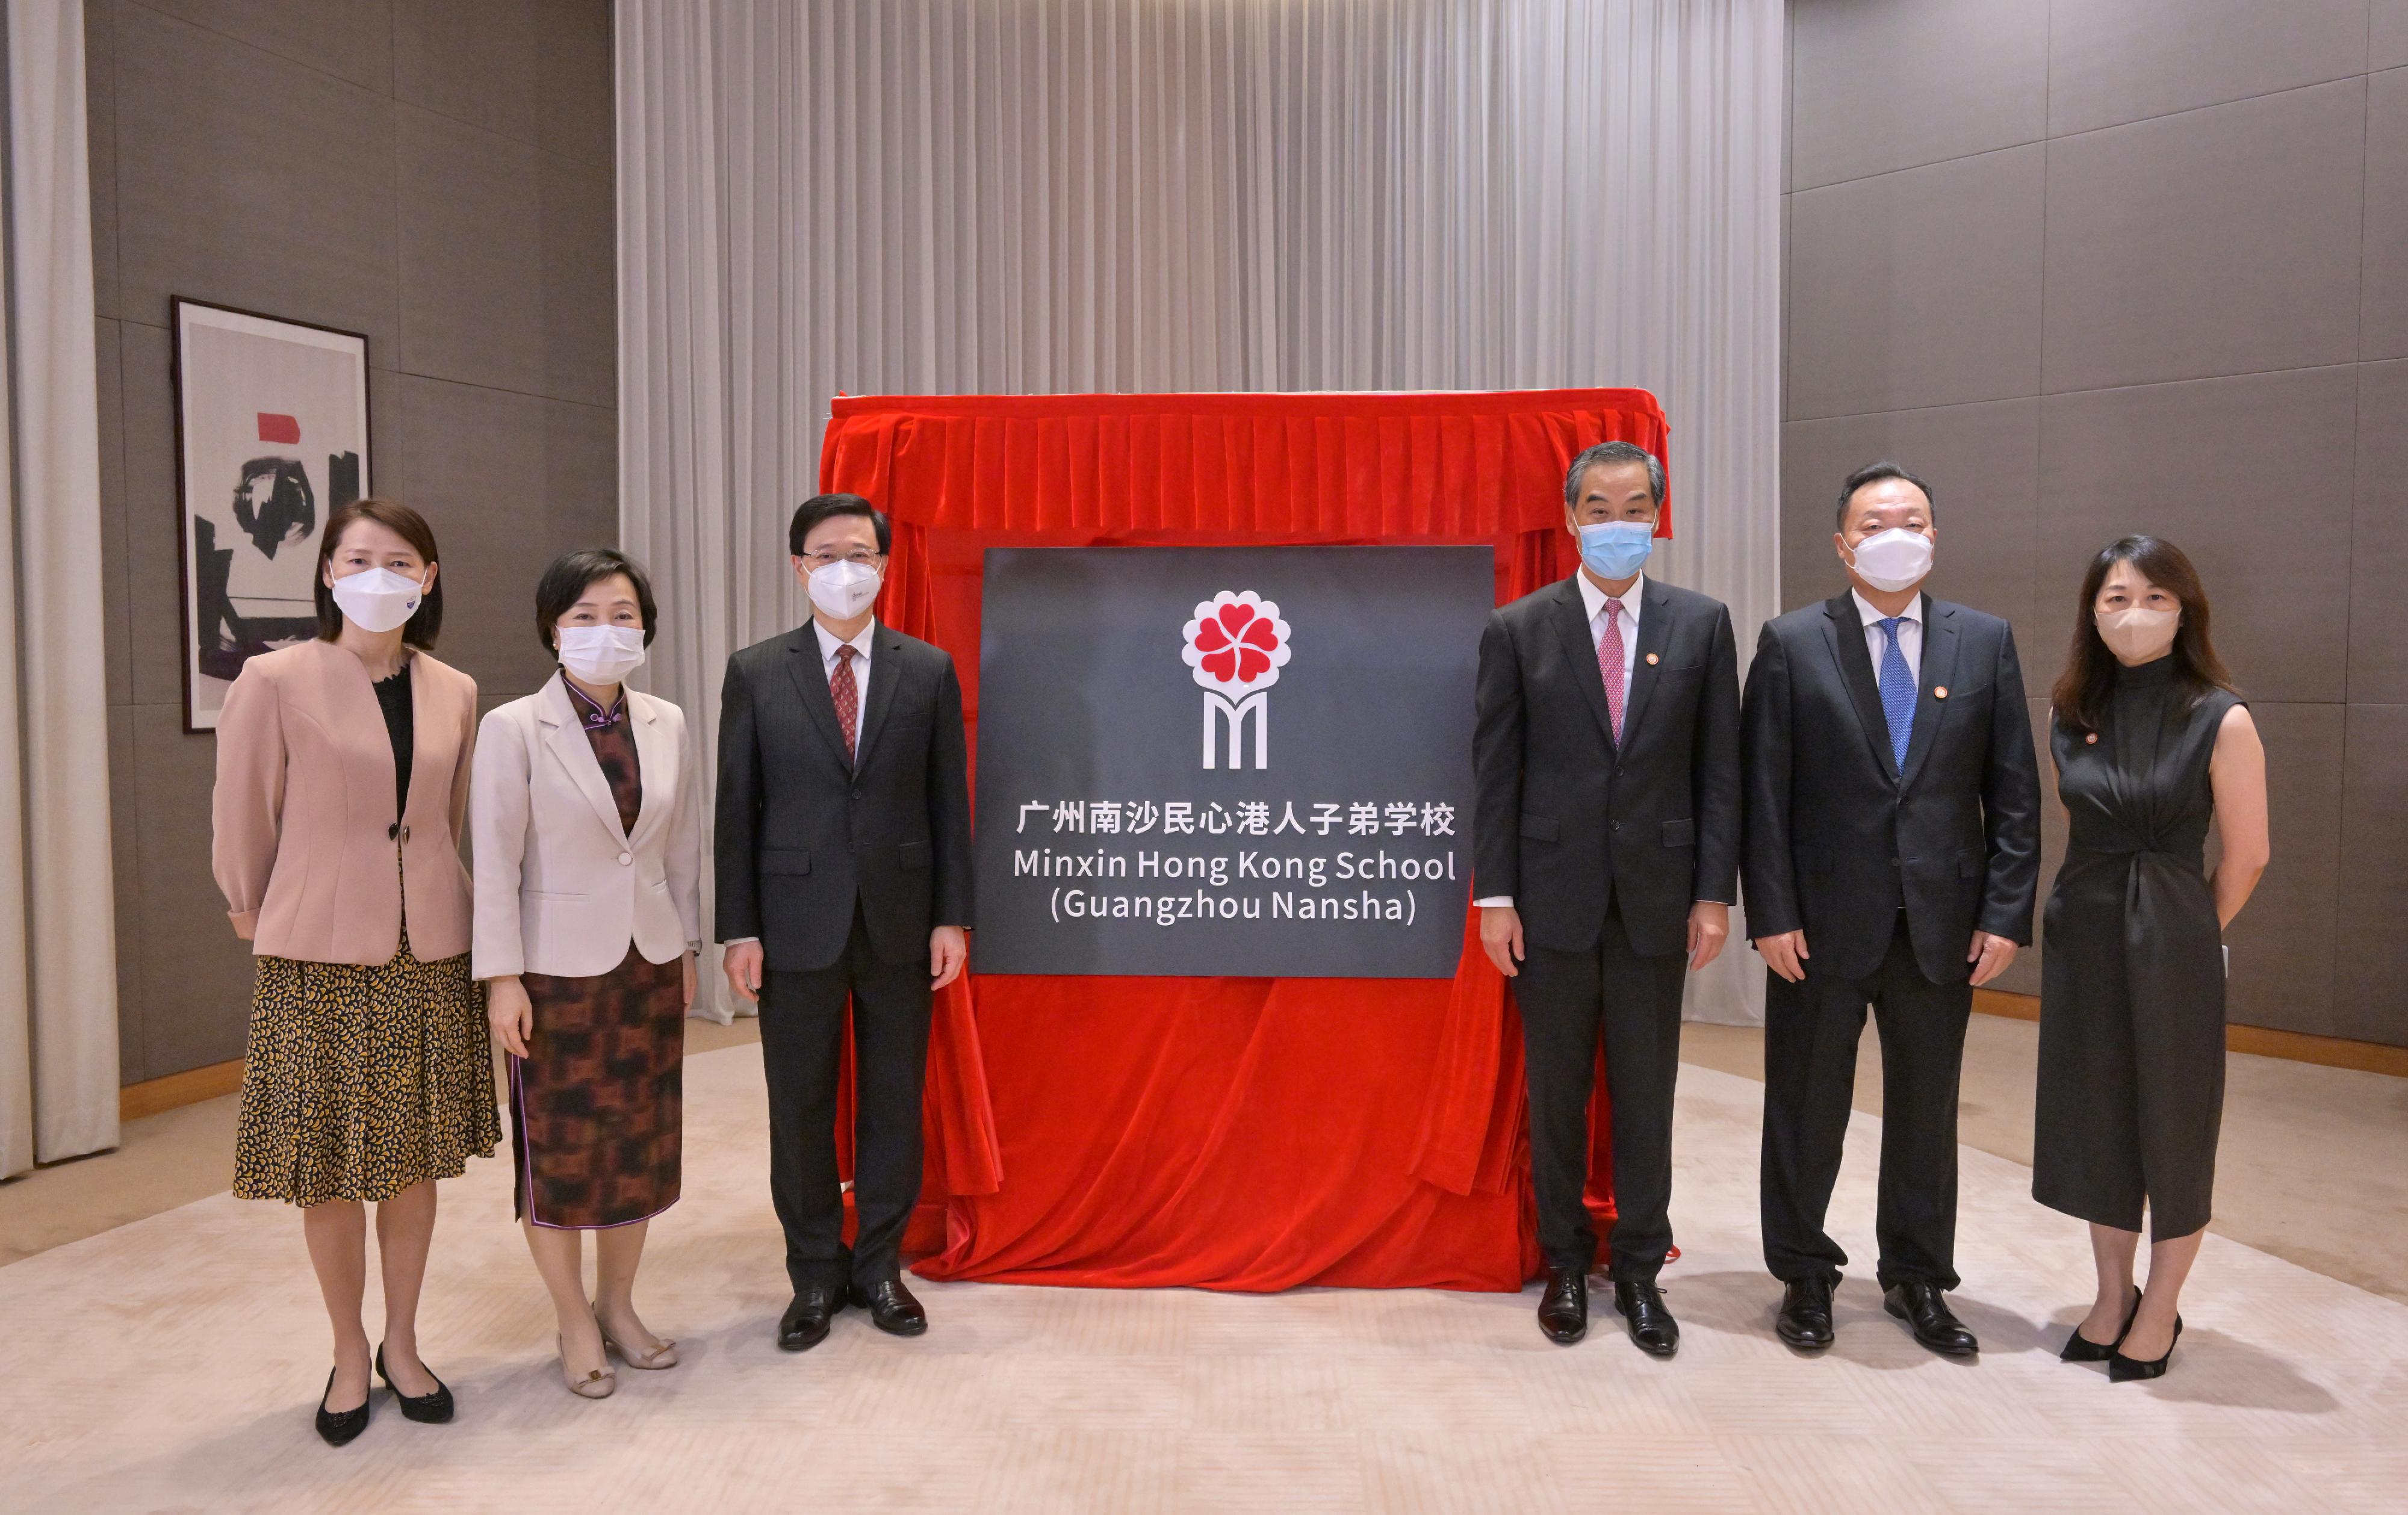 The Chief Executive, Mr John Lee, attended the opening ceremony of Minxin Hong Kong School in Nansha, Guangzhou, in the form of video conferencing today (September 1). Photo shows (from left) the Director of the Chief Executive's Office, Ms Carol Yip; the Secretary for Education, Dr Choi Yuk-lin; Mr Lee; Vice-Chairman of the National Committee of the Chinese People's Political Consultative Conference and Chairperson of the School Board of Minxin Hong Kong School Mr C Y Leung; the legal representative of Minxin Hong Kong School, Mr Yue Yi; and the Head of Communications of the Bay Area Hong Kong Centre, Ms Stephanie Liu.